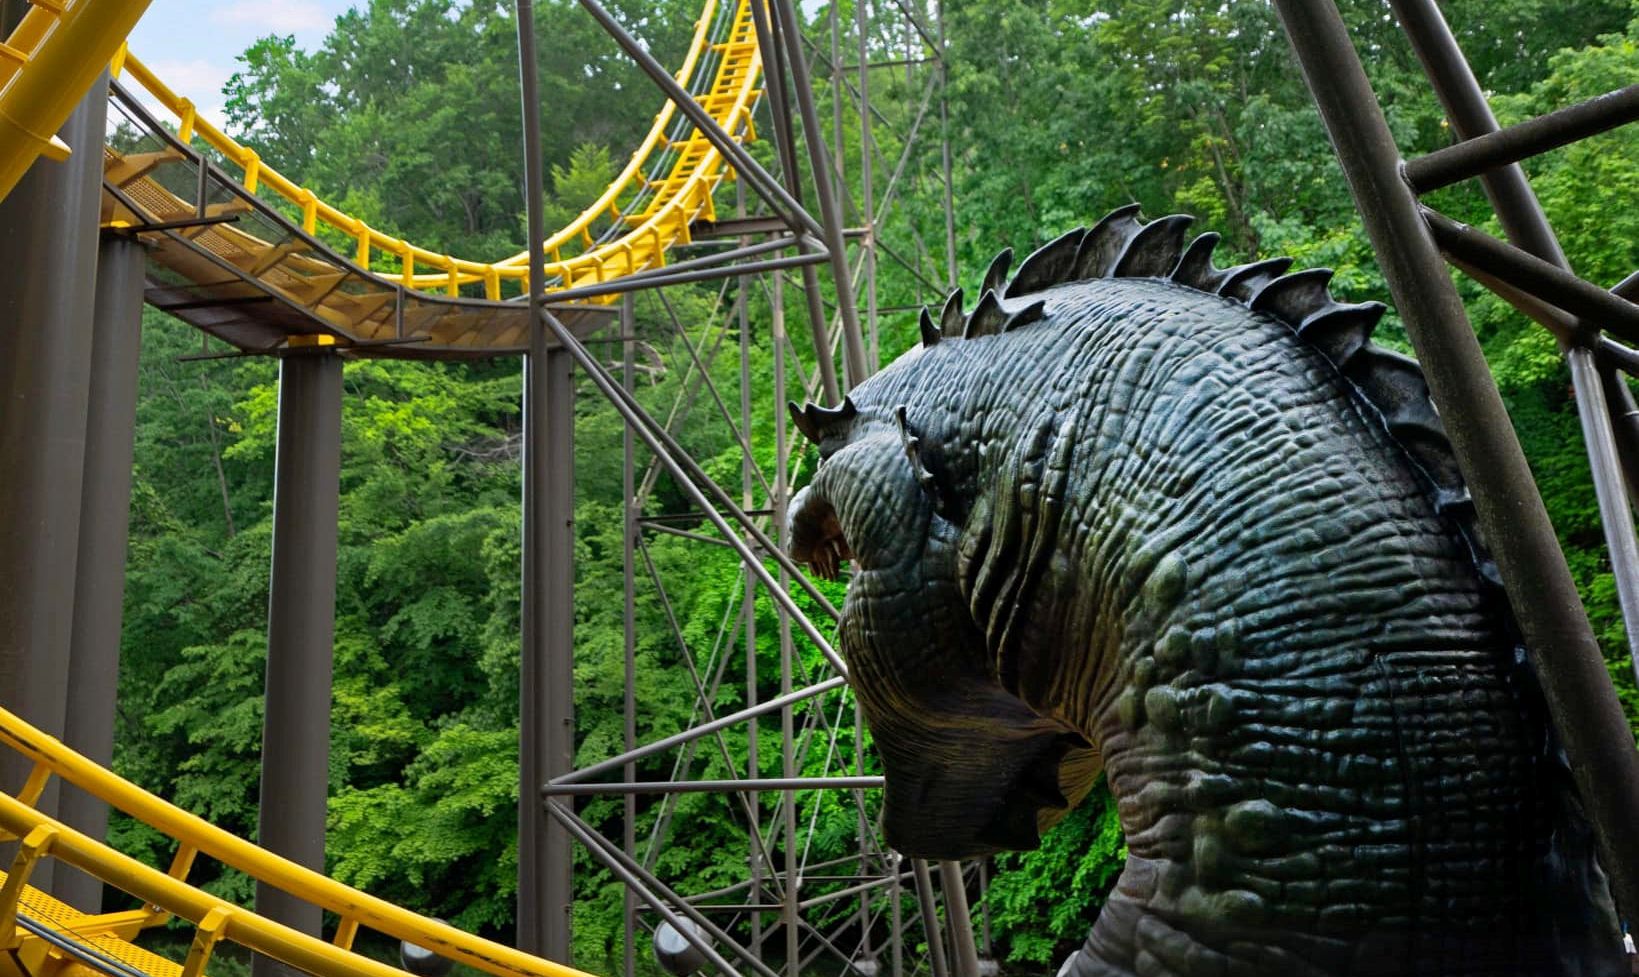 The Loch Ness Monster is back at Busch Gardens Williamsburg